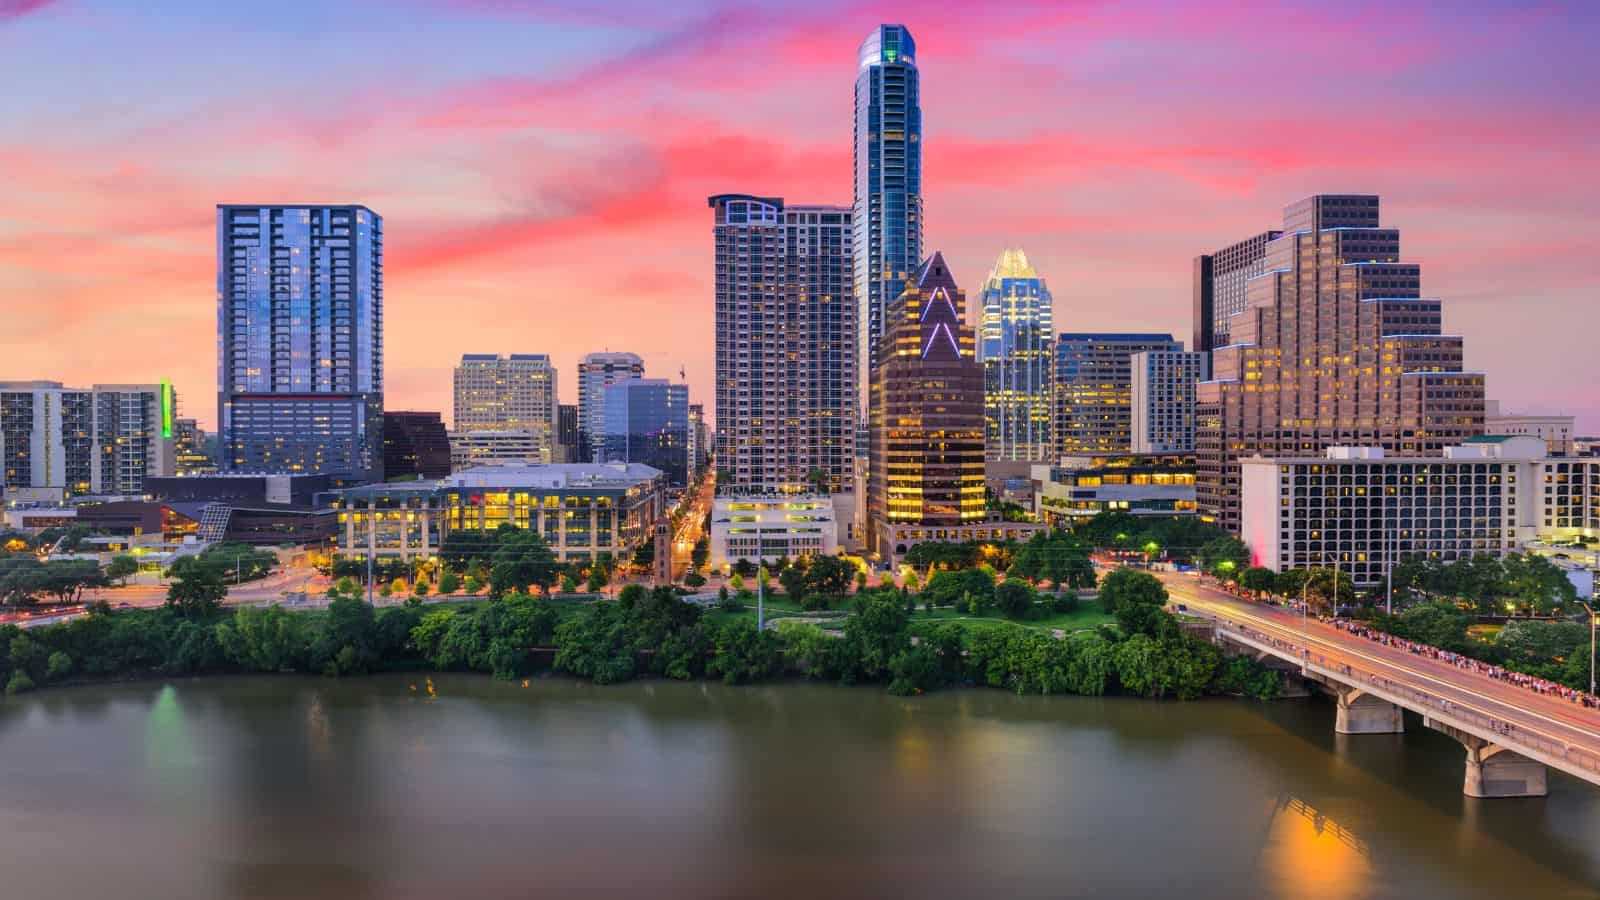 <p>Austin has experienced a rapid increase in living costs over the past few years, particularly in the housing sector. <a href="https://www.kvue.com/article/money/economy/boomtown-2040/austin-cost-of-living-increase-filterbuy/269-de1d7216-fdcb-4c12-b858-081be5869712">KVUE</a> reports that the cost of living in Austin is 17.8% higher than it was a decade ago, with housing costs having increased by 20.7%.</p>